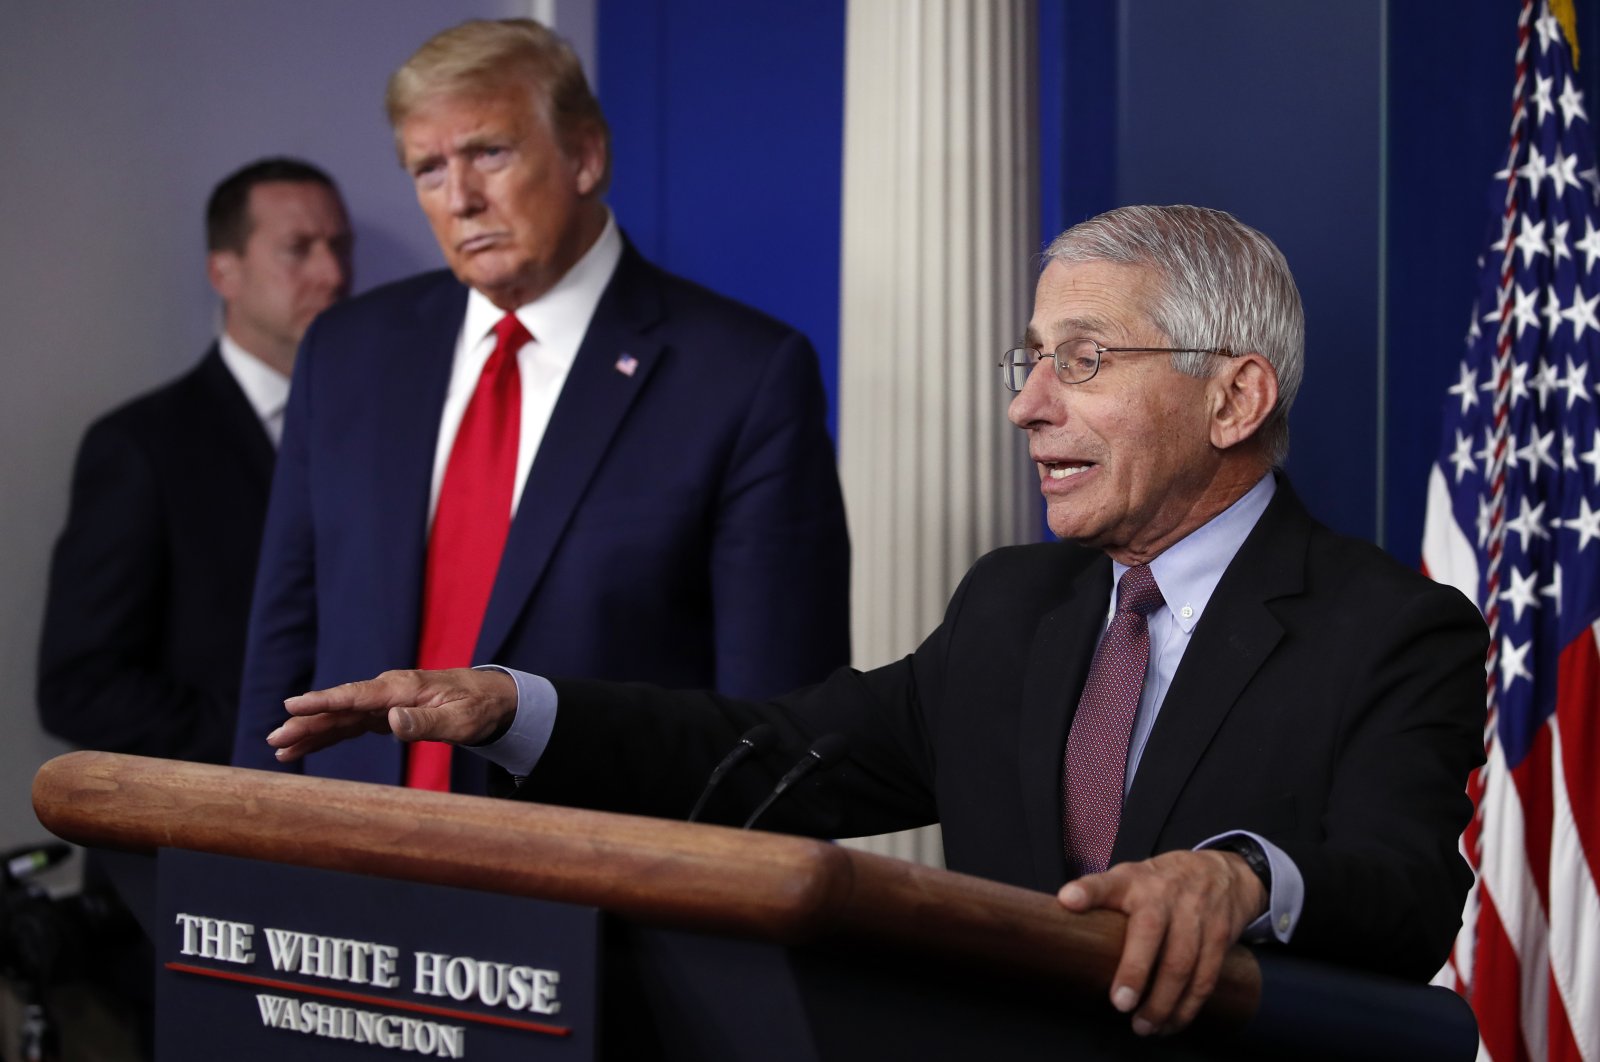 President Donald Trump listens as Dr. Anthony Fauci, director of the National Institute of Allergy and Infectious Diseases, speaks about the coronavirus in the James Brady Press Briefing Room of the White House in Washington, April 22, 2020. (AP Photo)